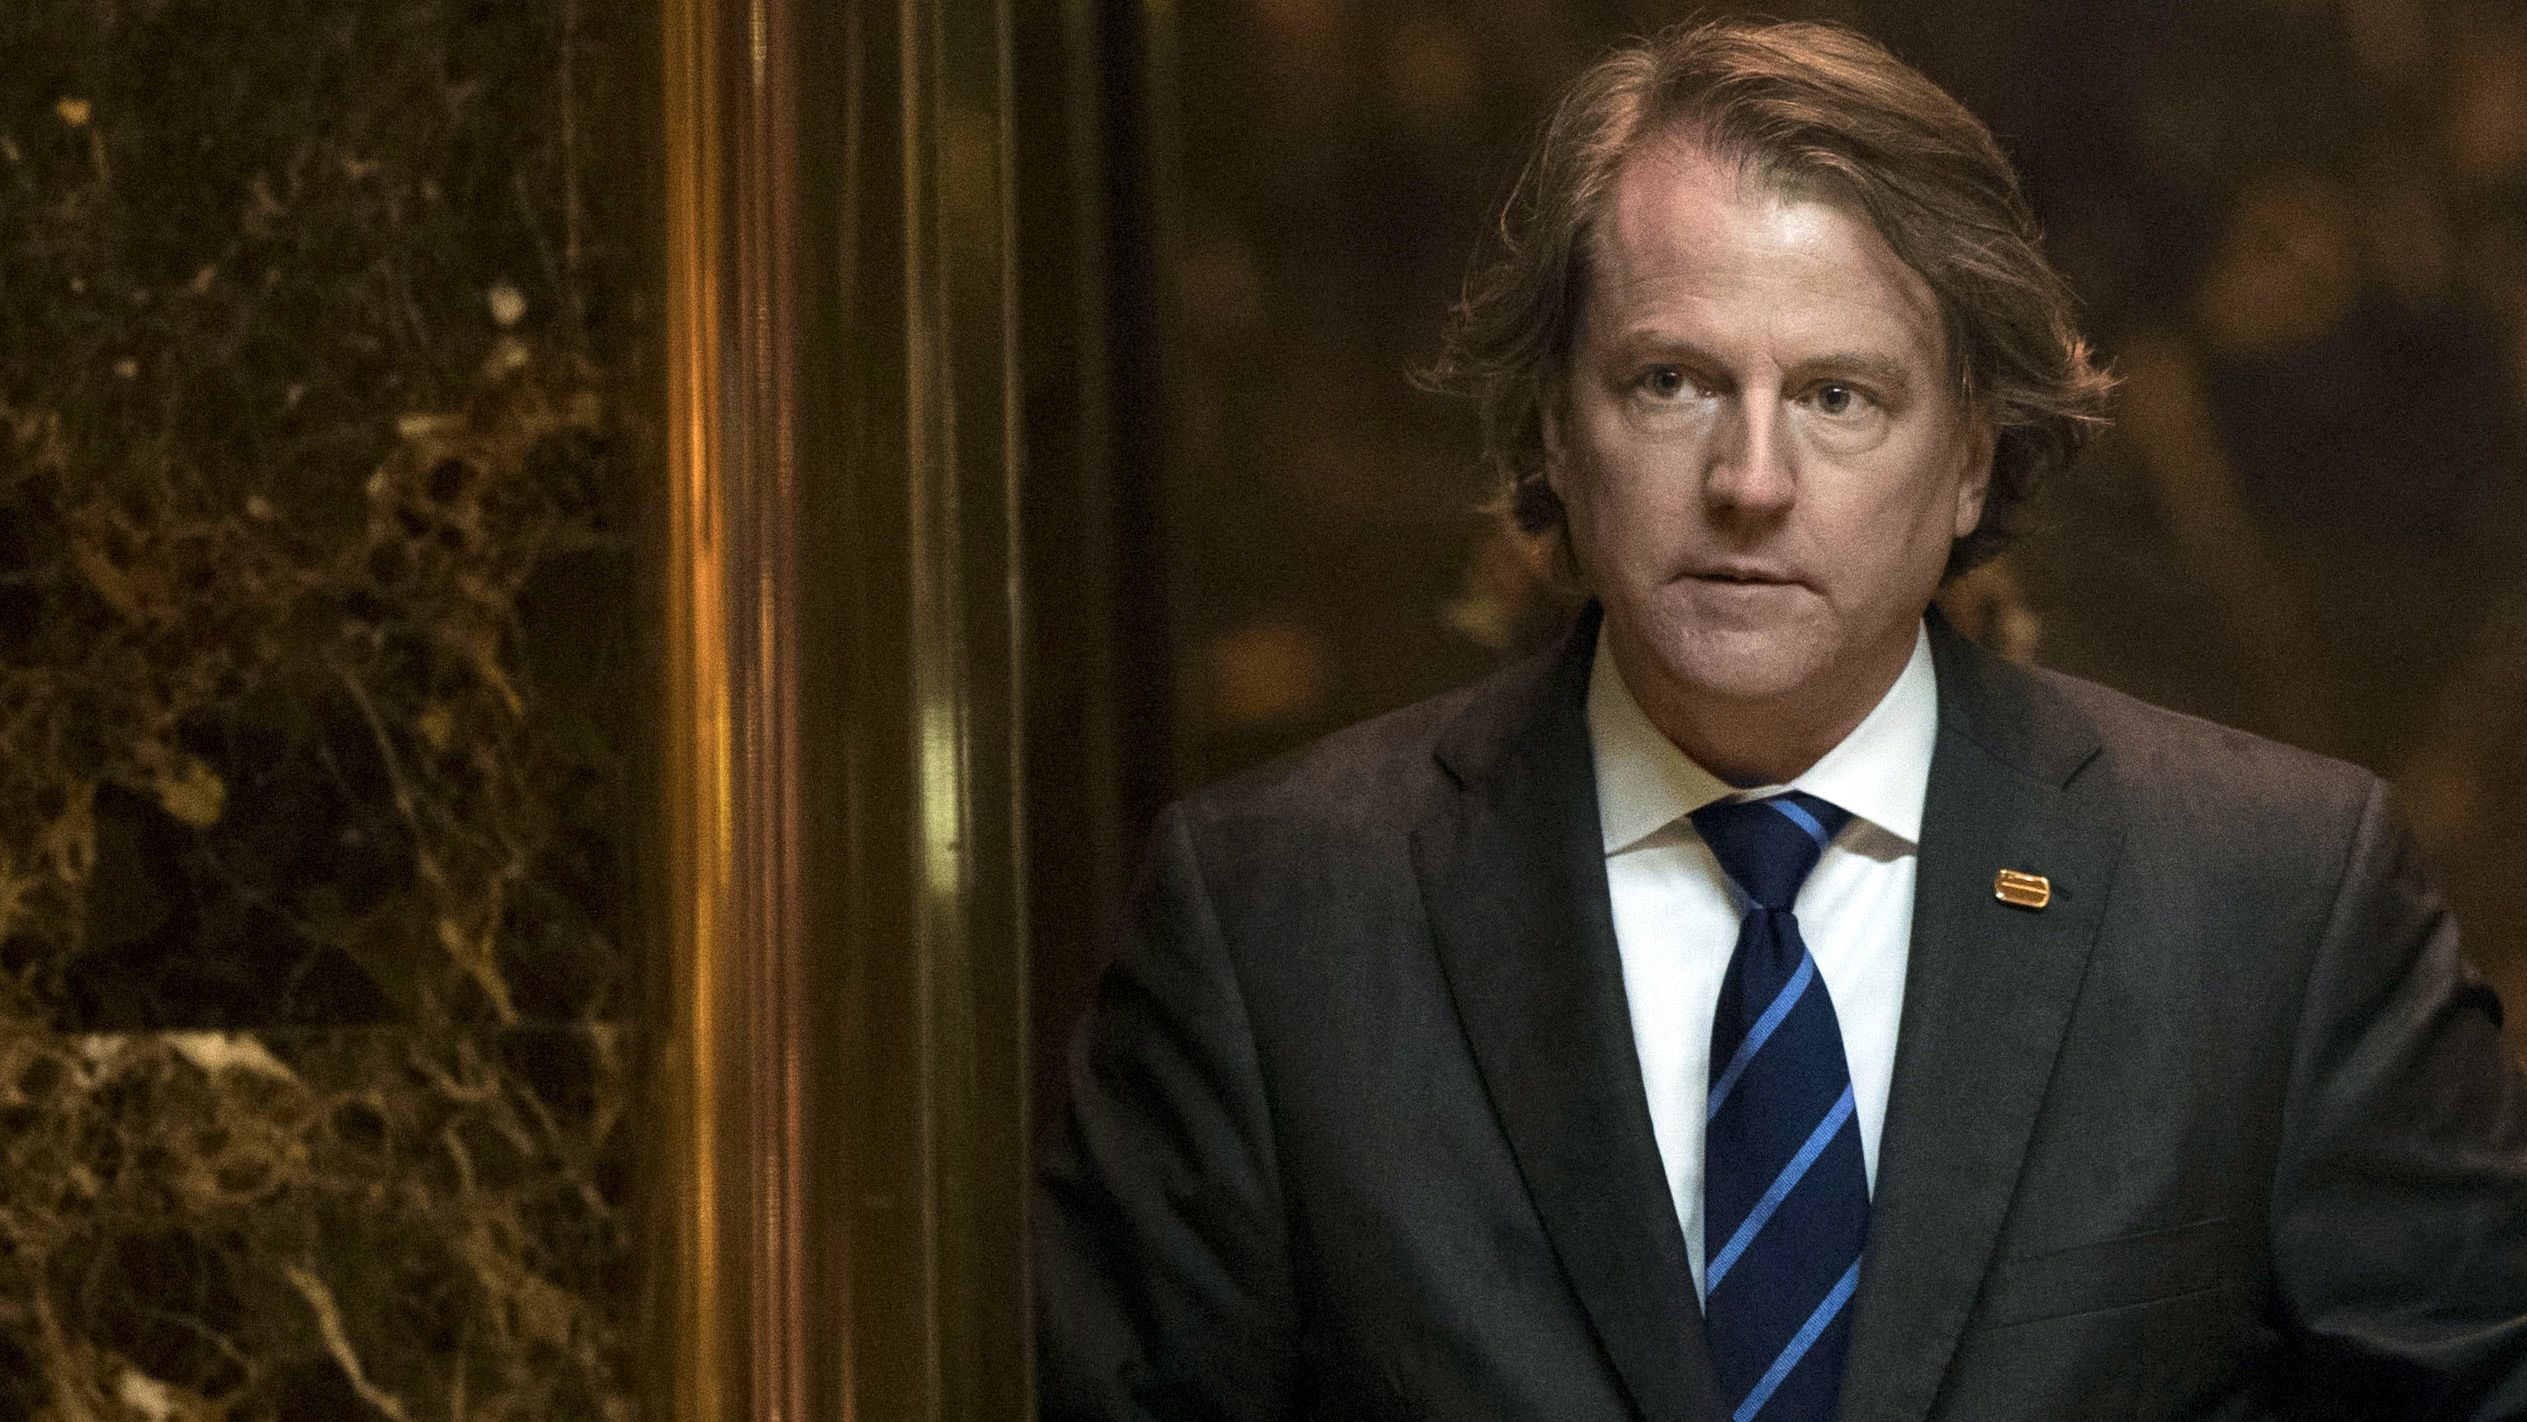 Don McGahn, general counsel for the Trump transition team, gets into an elevator in the lobby at Trump Tower, November 15, in New York City.  